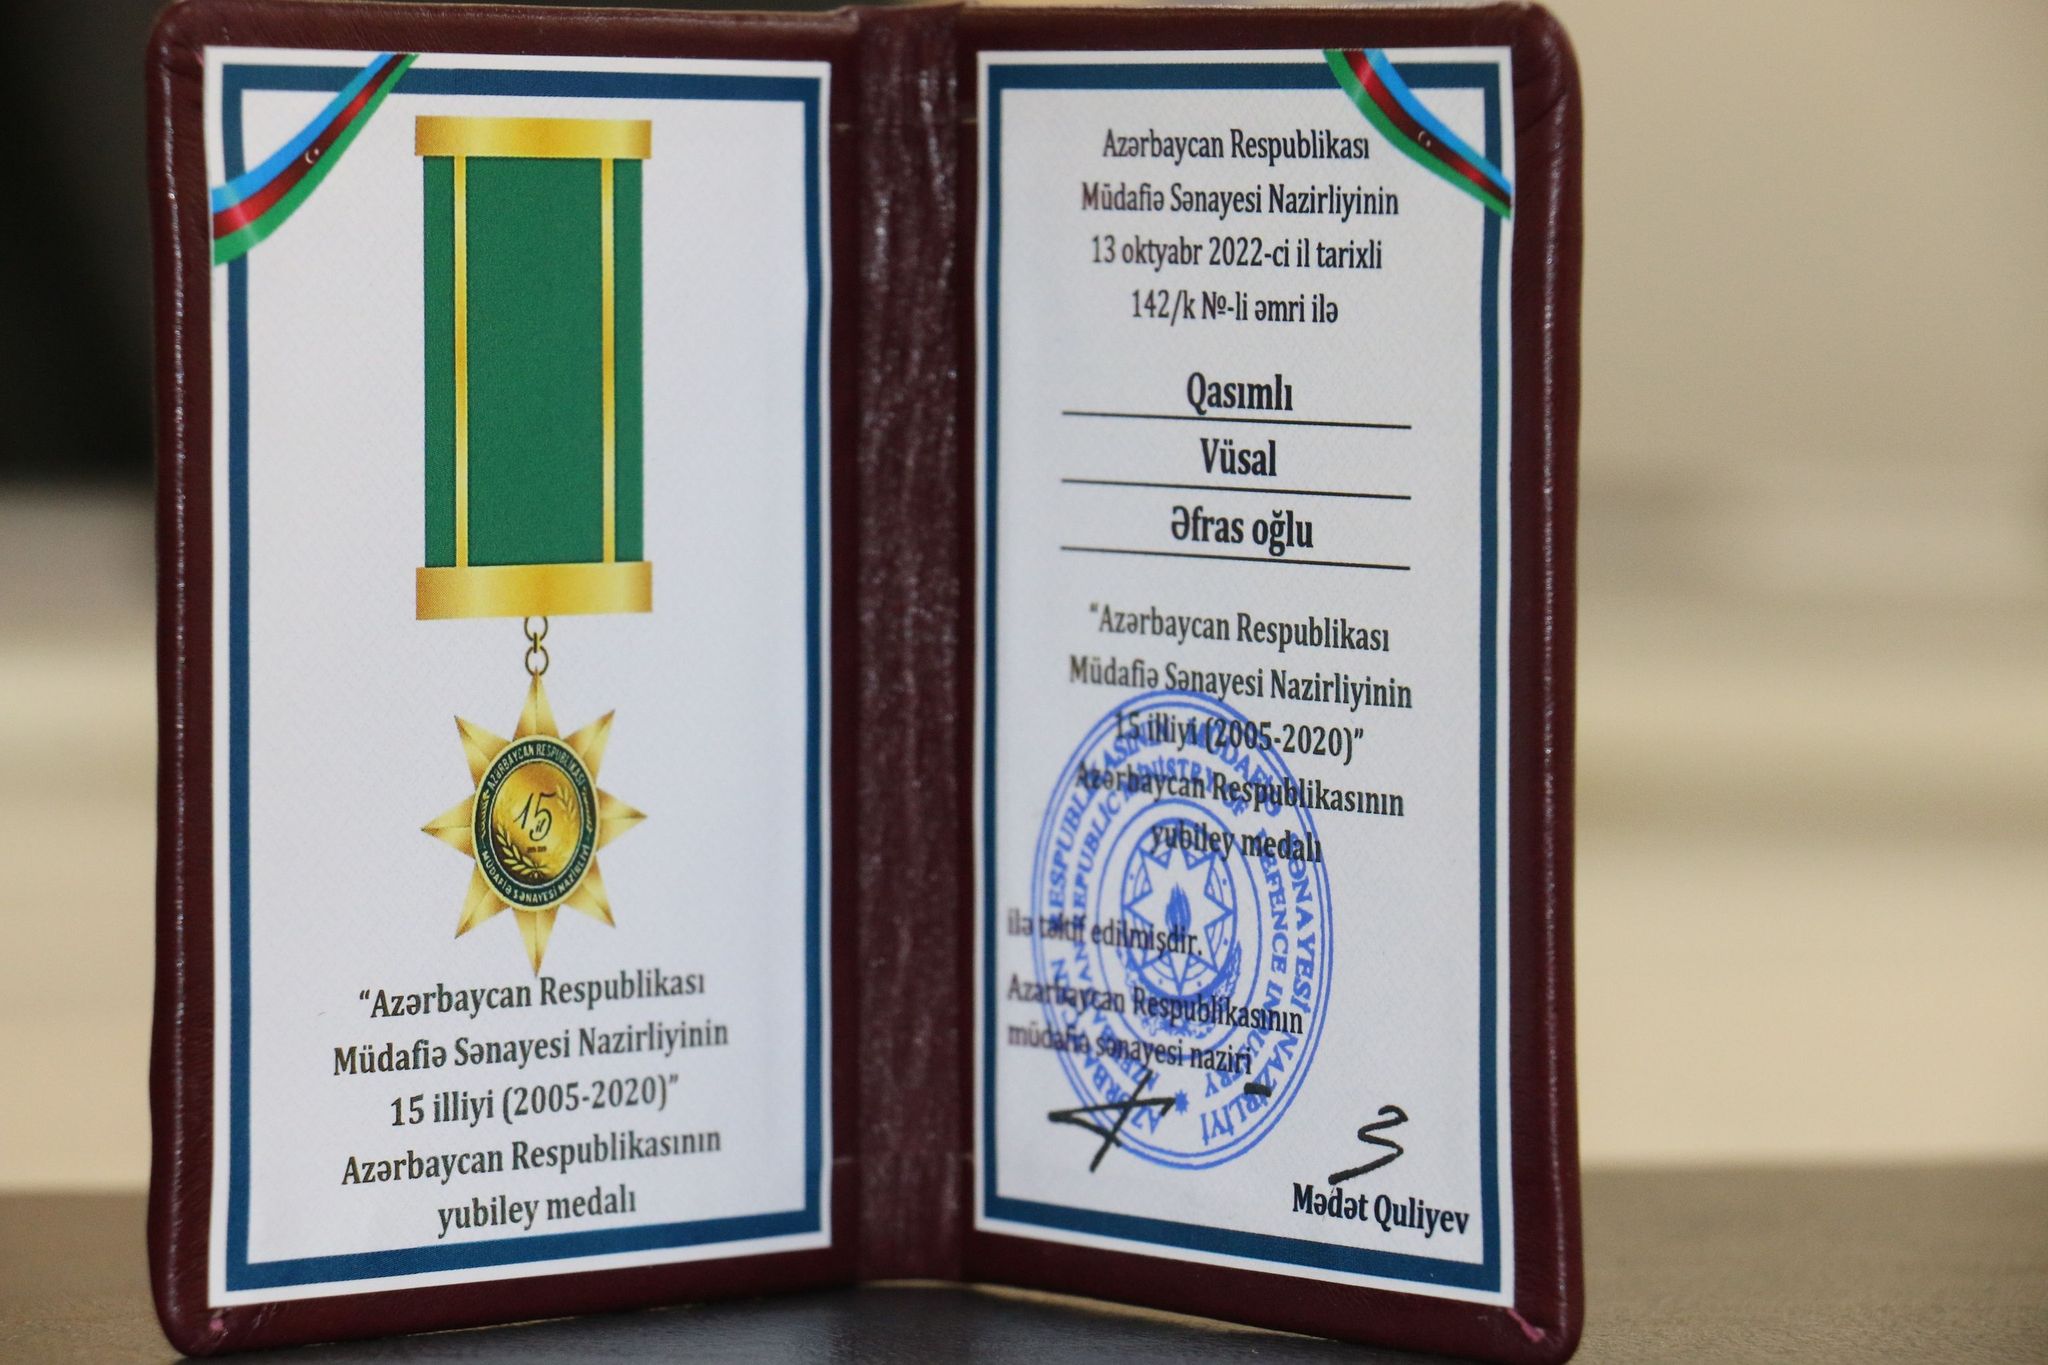 Vusal Gasimli was awarded the 15th anniversary medal of the Ministry of Defense Industry of Azerbaijan